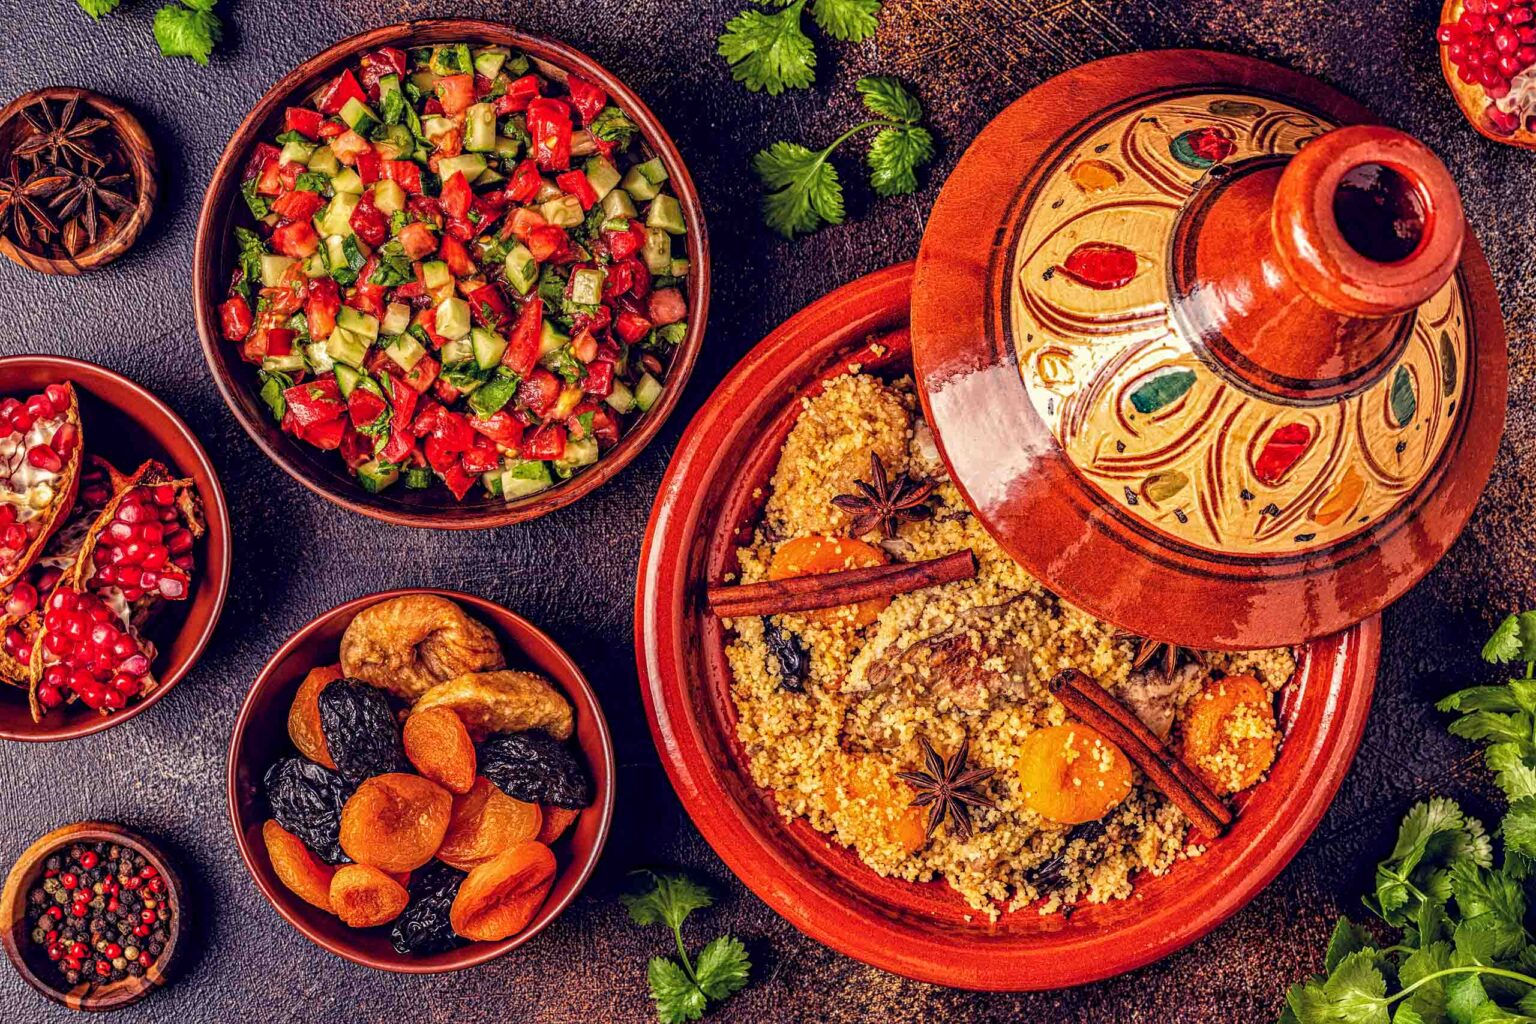 Tagine with Moroccan couscous dish.